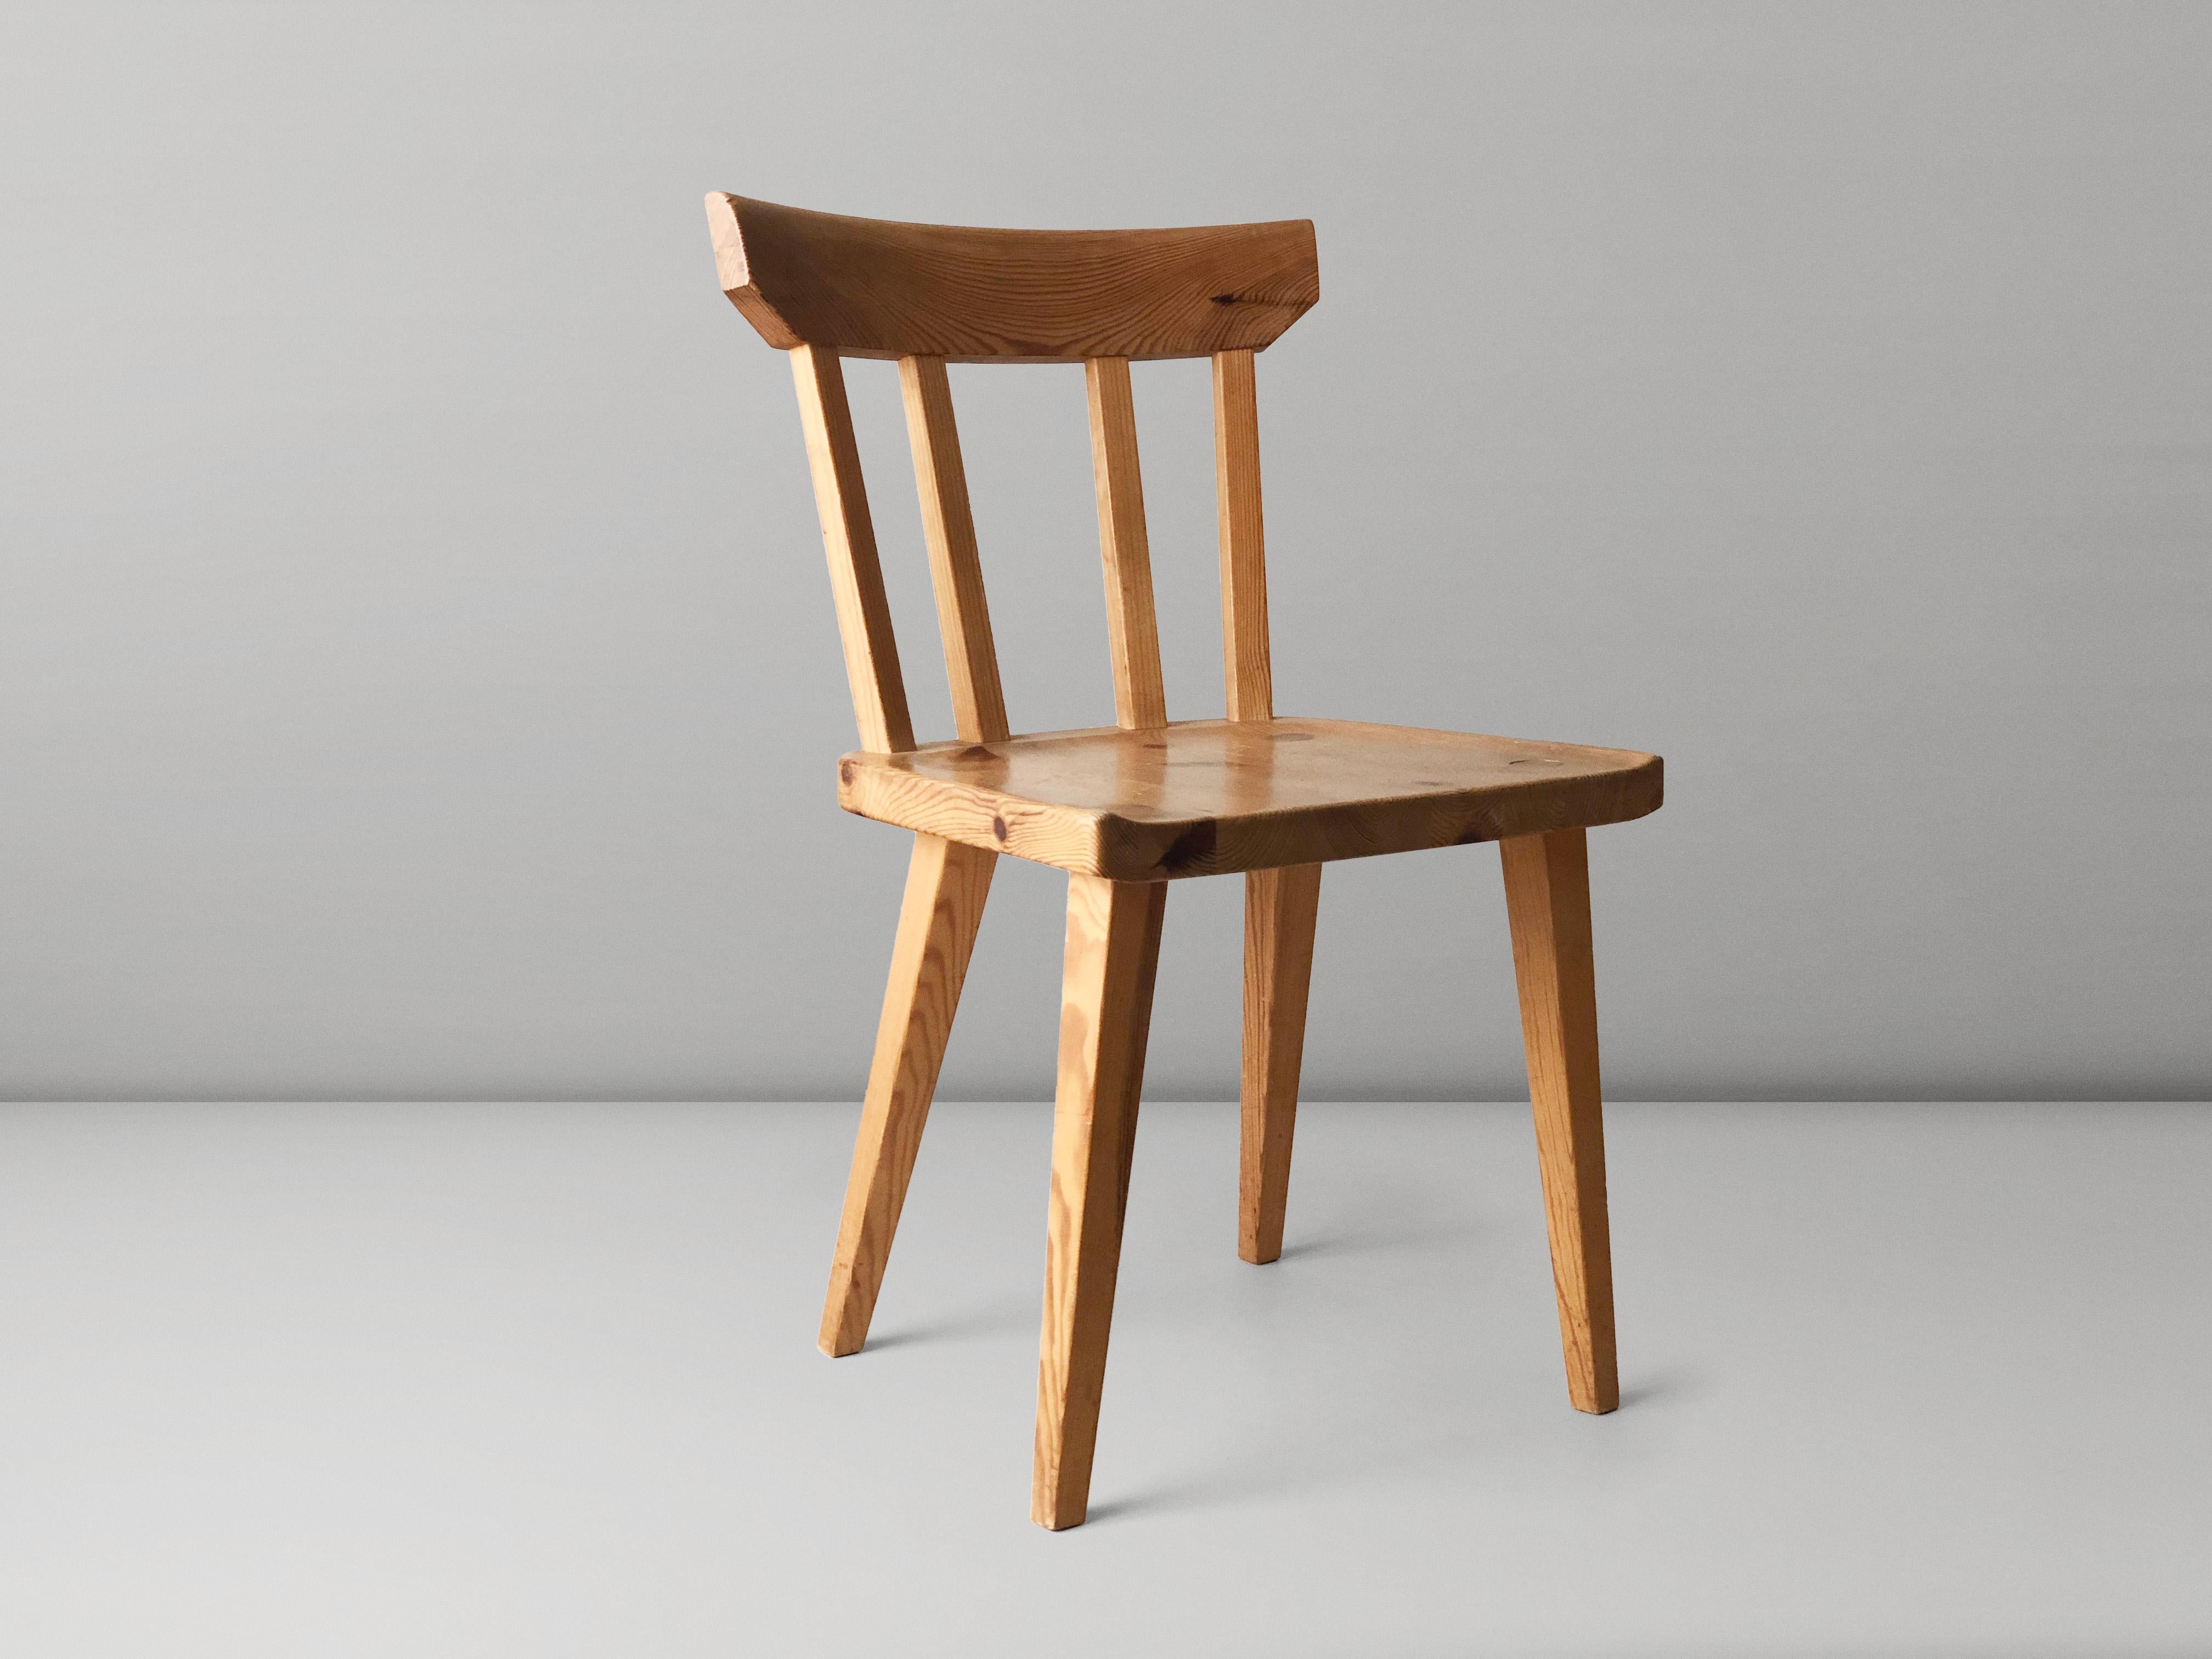 Set of two '528' Swedish pine dining chairs by Göran Malmwall manufactured by Karl Andersson & Söner, Husqvarna, Sweden.

Swedish Pine, Curved top rail with beveled bottom corners, four square profile vertical splats, gently carved seat, square